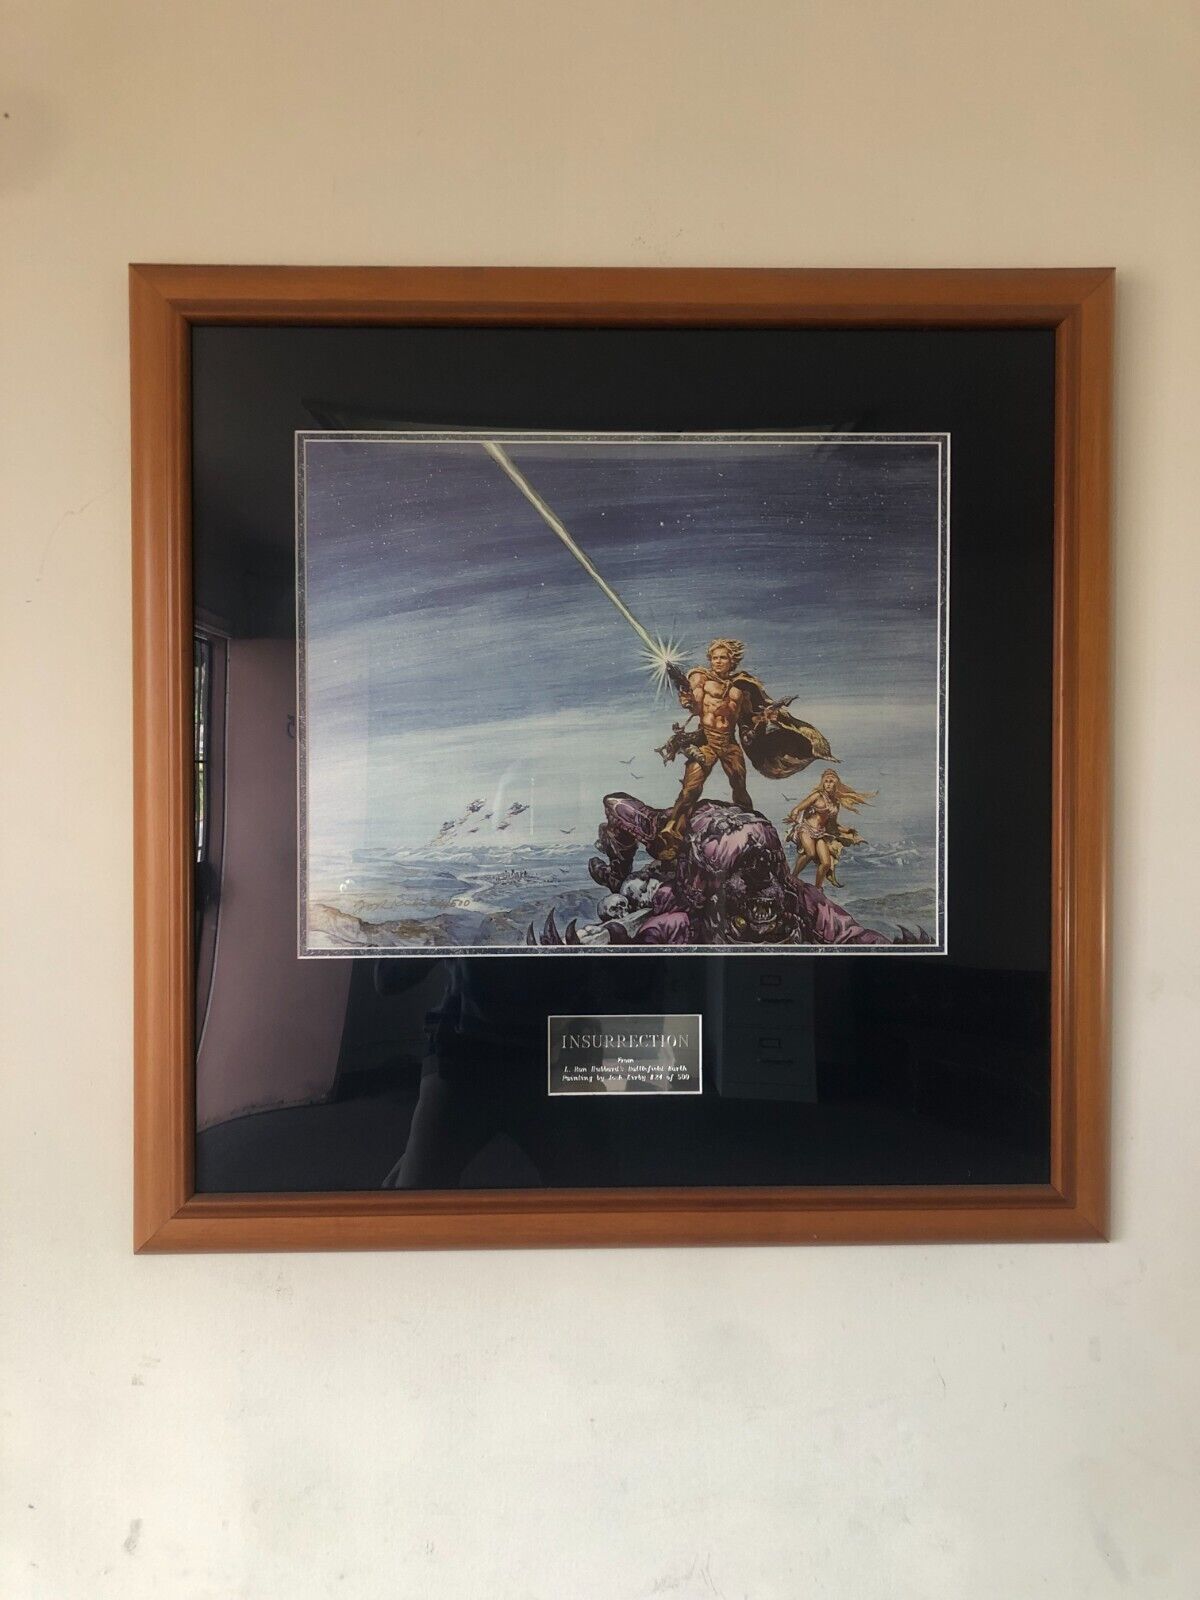 'INSURRECTION' framed signed print by Josh Kirby 1984 numbered 24/500